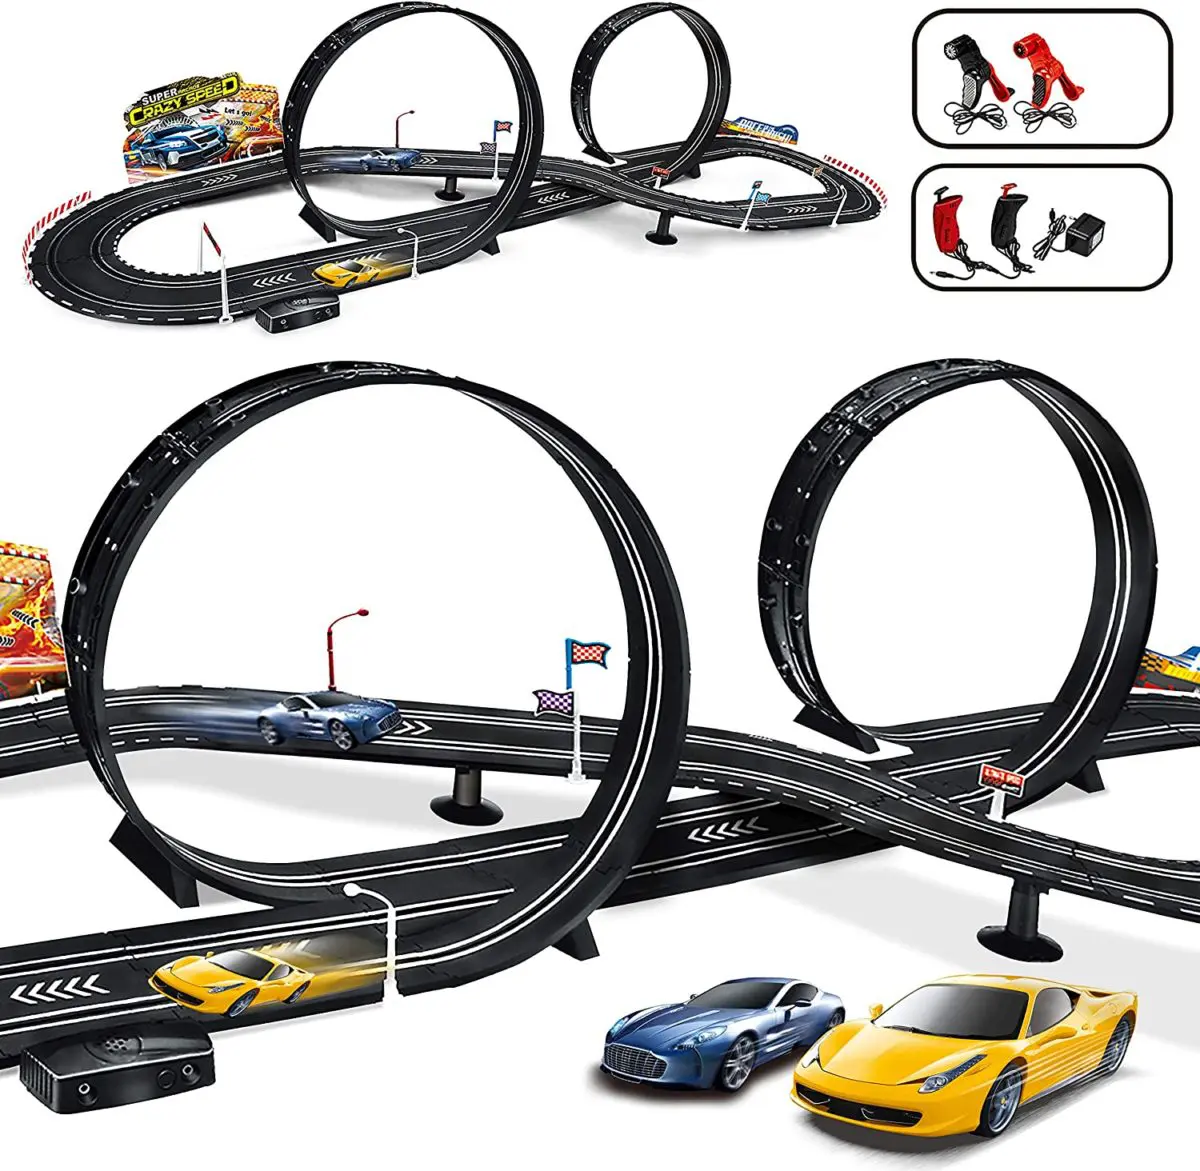 MAOXIAN Kids Toy Electric Powered Slot Car Race Track - Top Toys and Gifts for Nine Year Old Boys 1